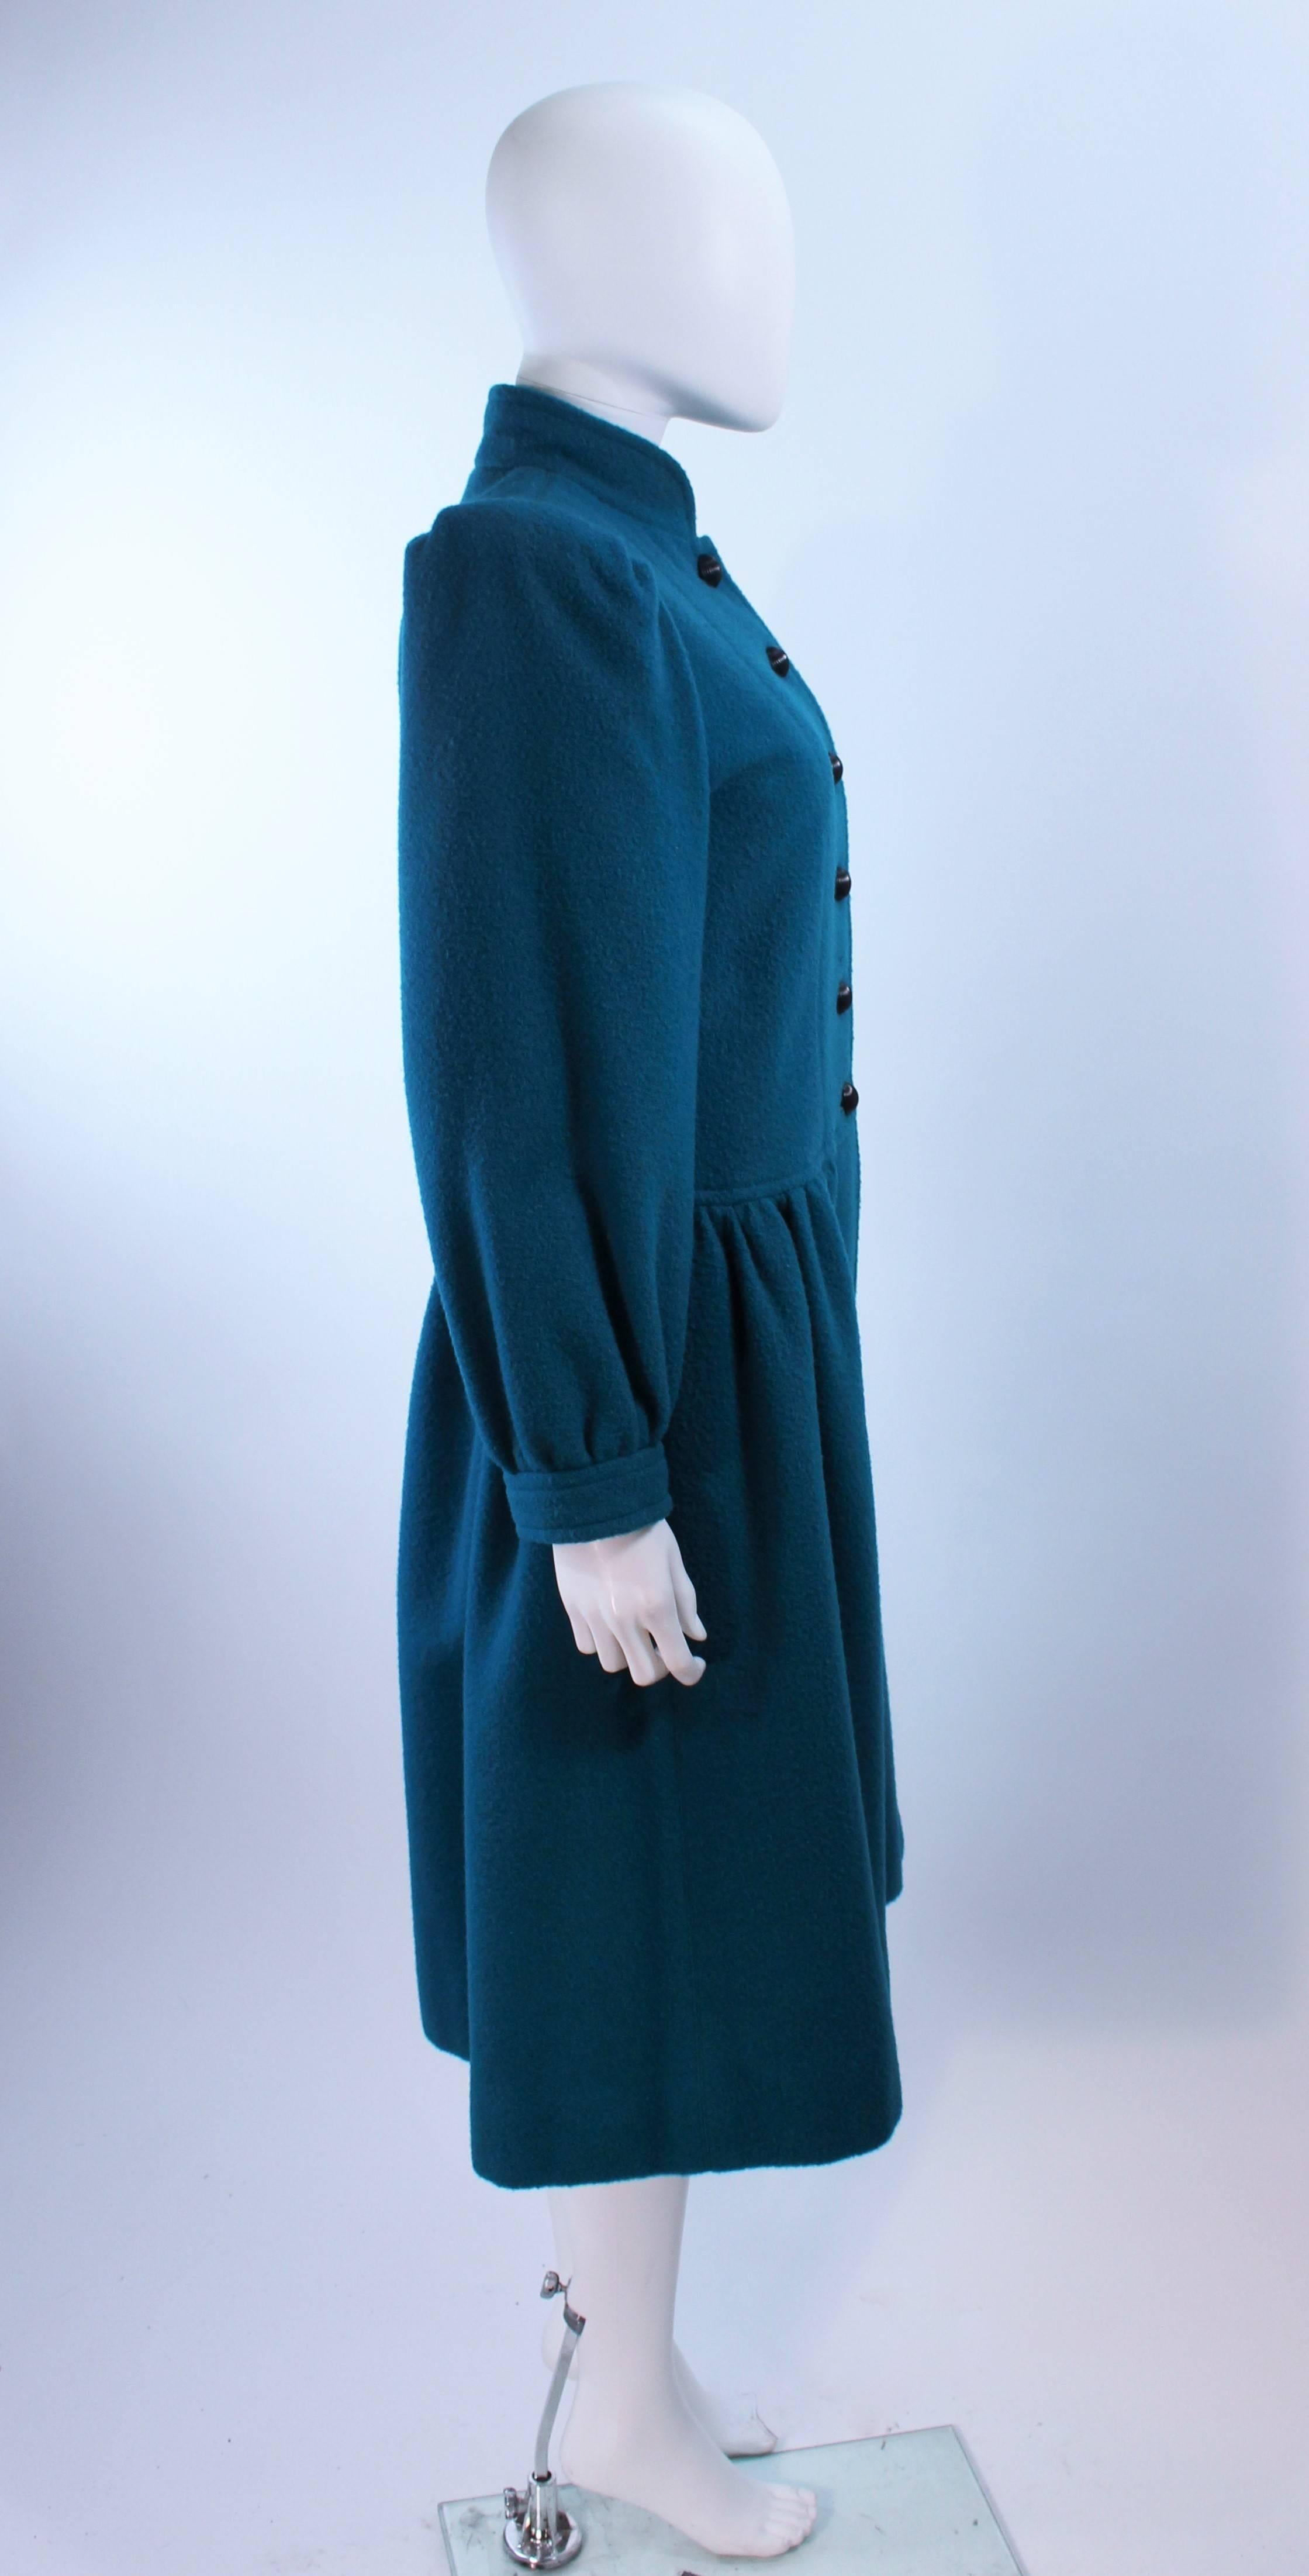 YVES SAINT LAURENT Turquoise Wool Coat Size 6 For Sale 1